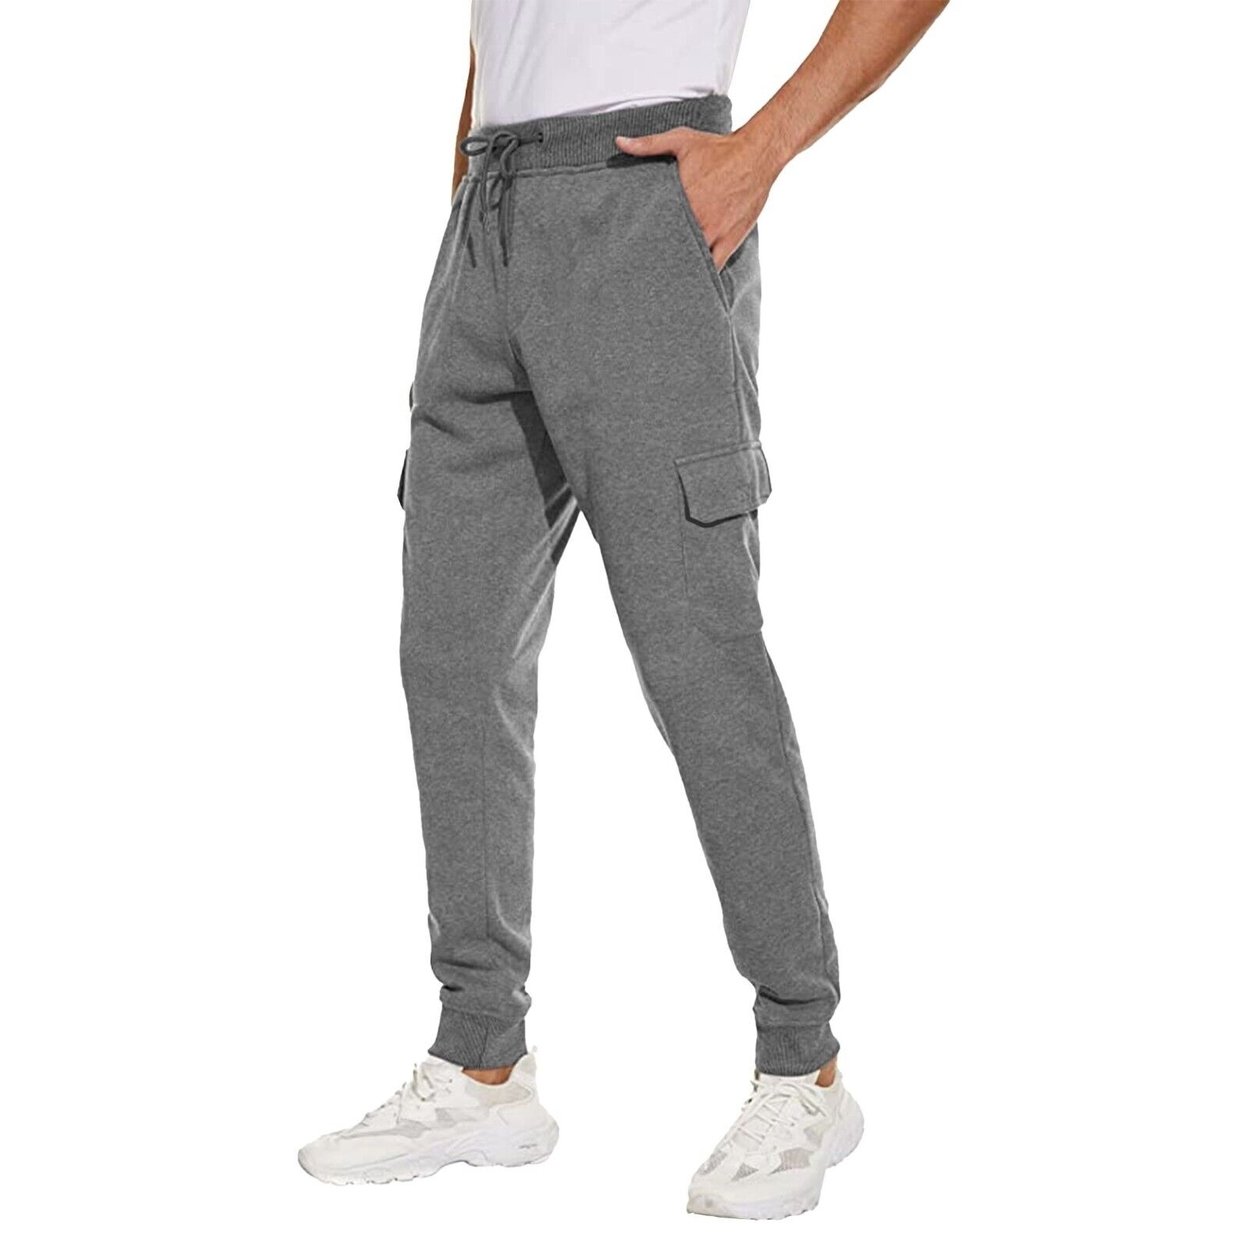 Men's Ultra Soft Winter Warm Thick Sweat Pant Athletic Sherpa Lined Jogger Pants - Grey, Xx-large